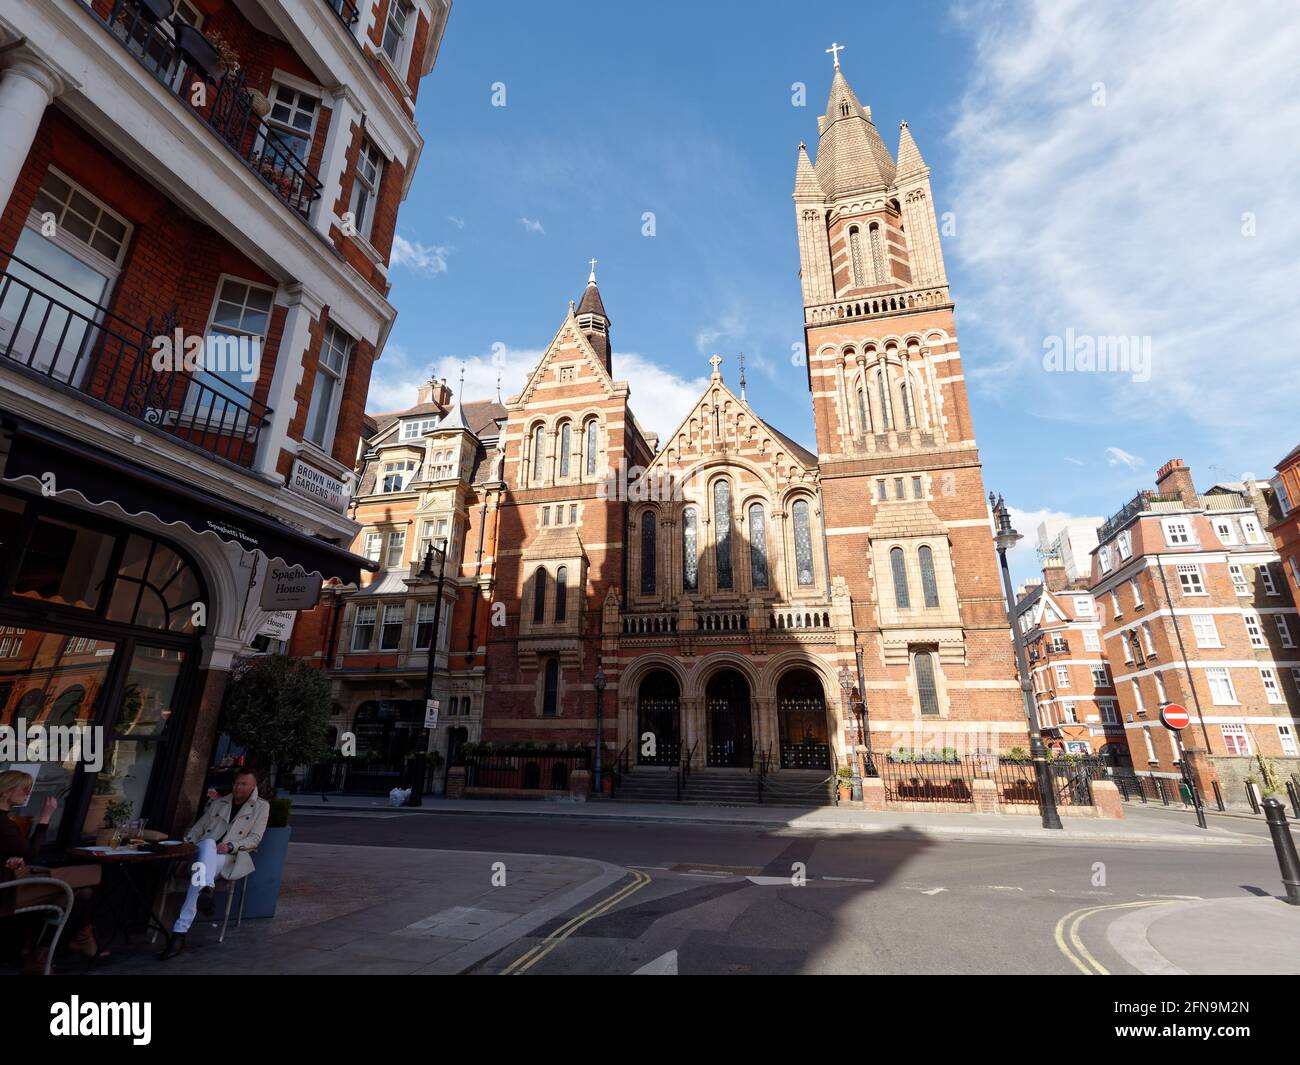 London, Greater London, England - May 11 2021: Ukranian Catholic Cathedral at the intersection of Duke Street and Brown Hart Gardens. Stock Photo